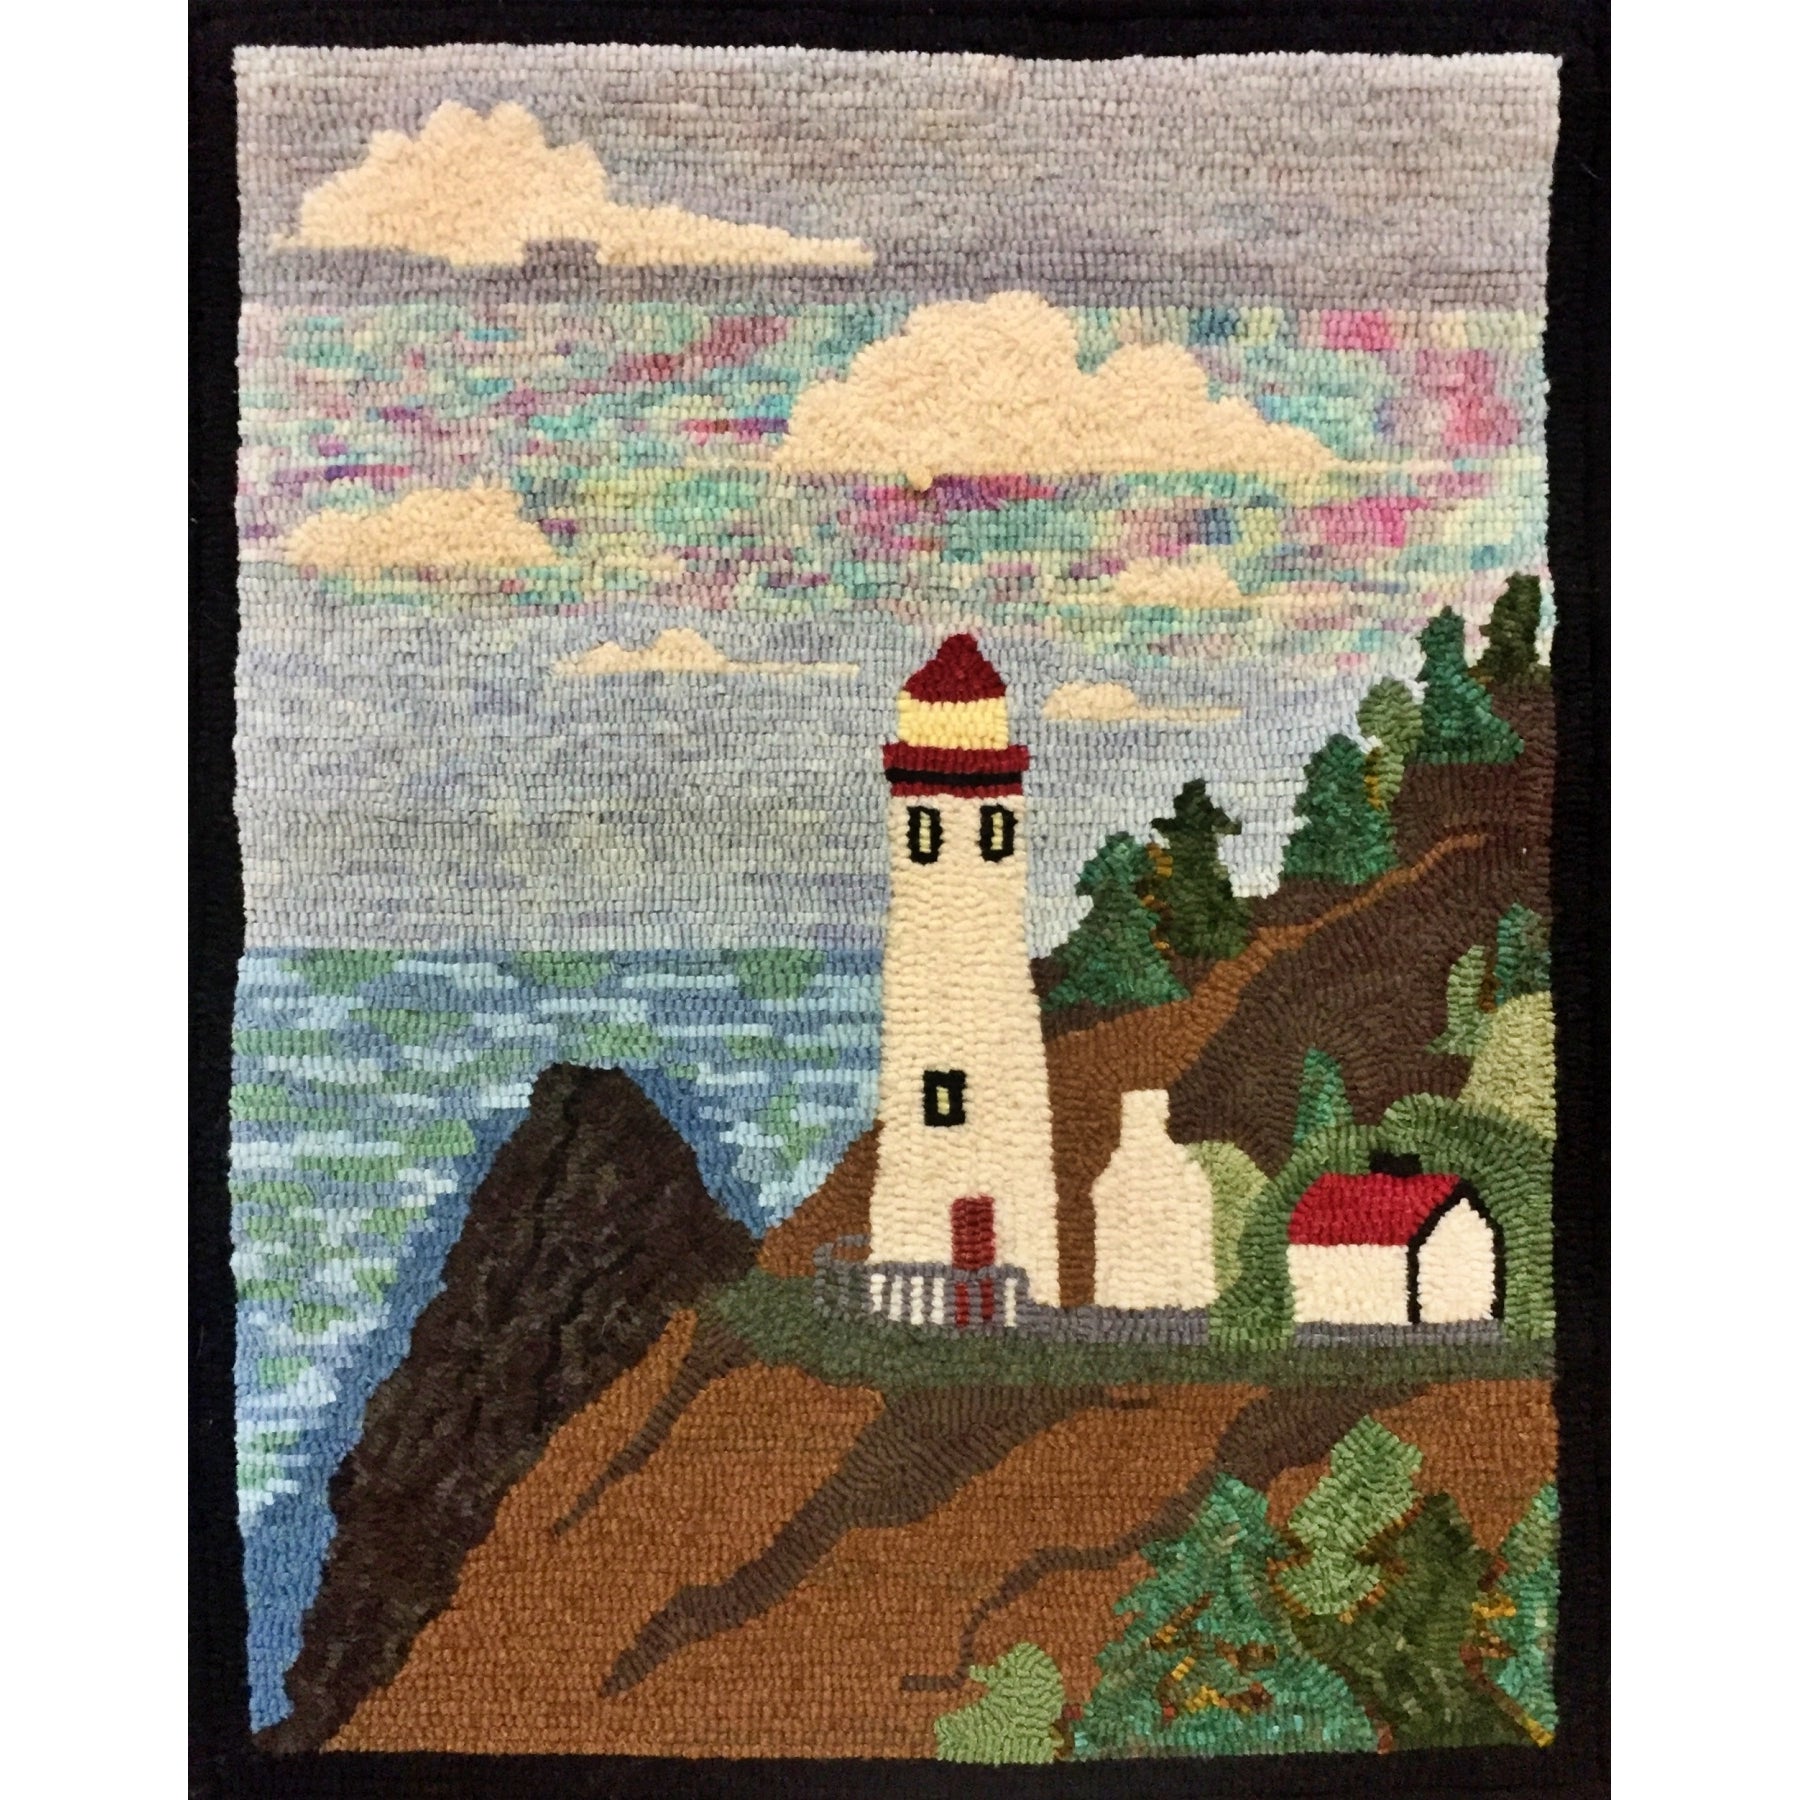 The Art of Hand Quilting - Needlearts & Rug Hooking: How to do